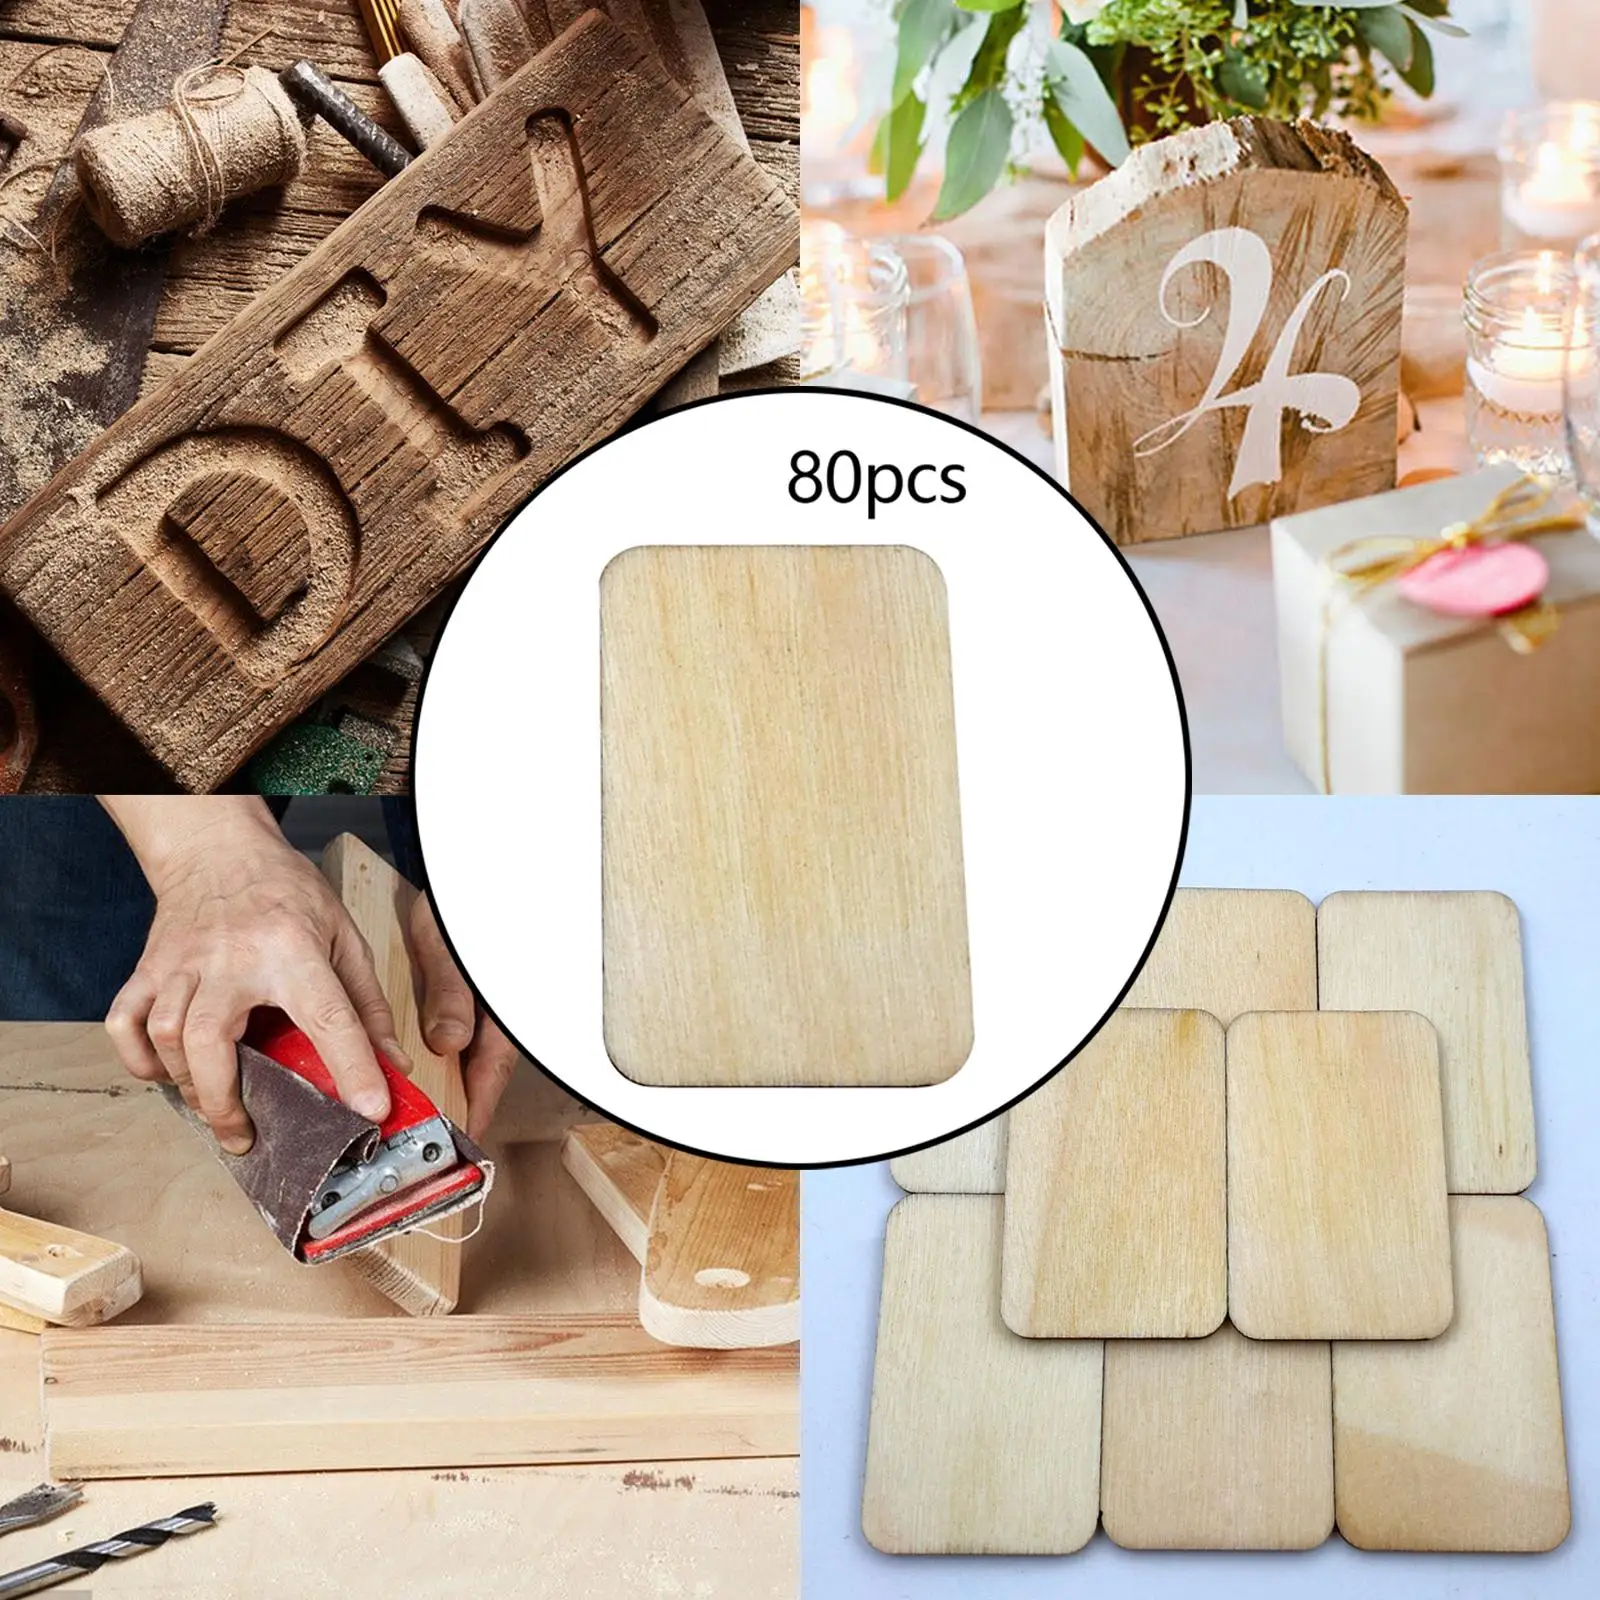 80Pcs Natural Unfinished Wood Pieces Blank Wood Slices Cutouts Disc for DIY Crafts Sign Table Centerpieces Art Craft Project